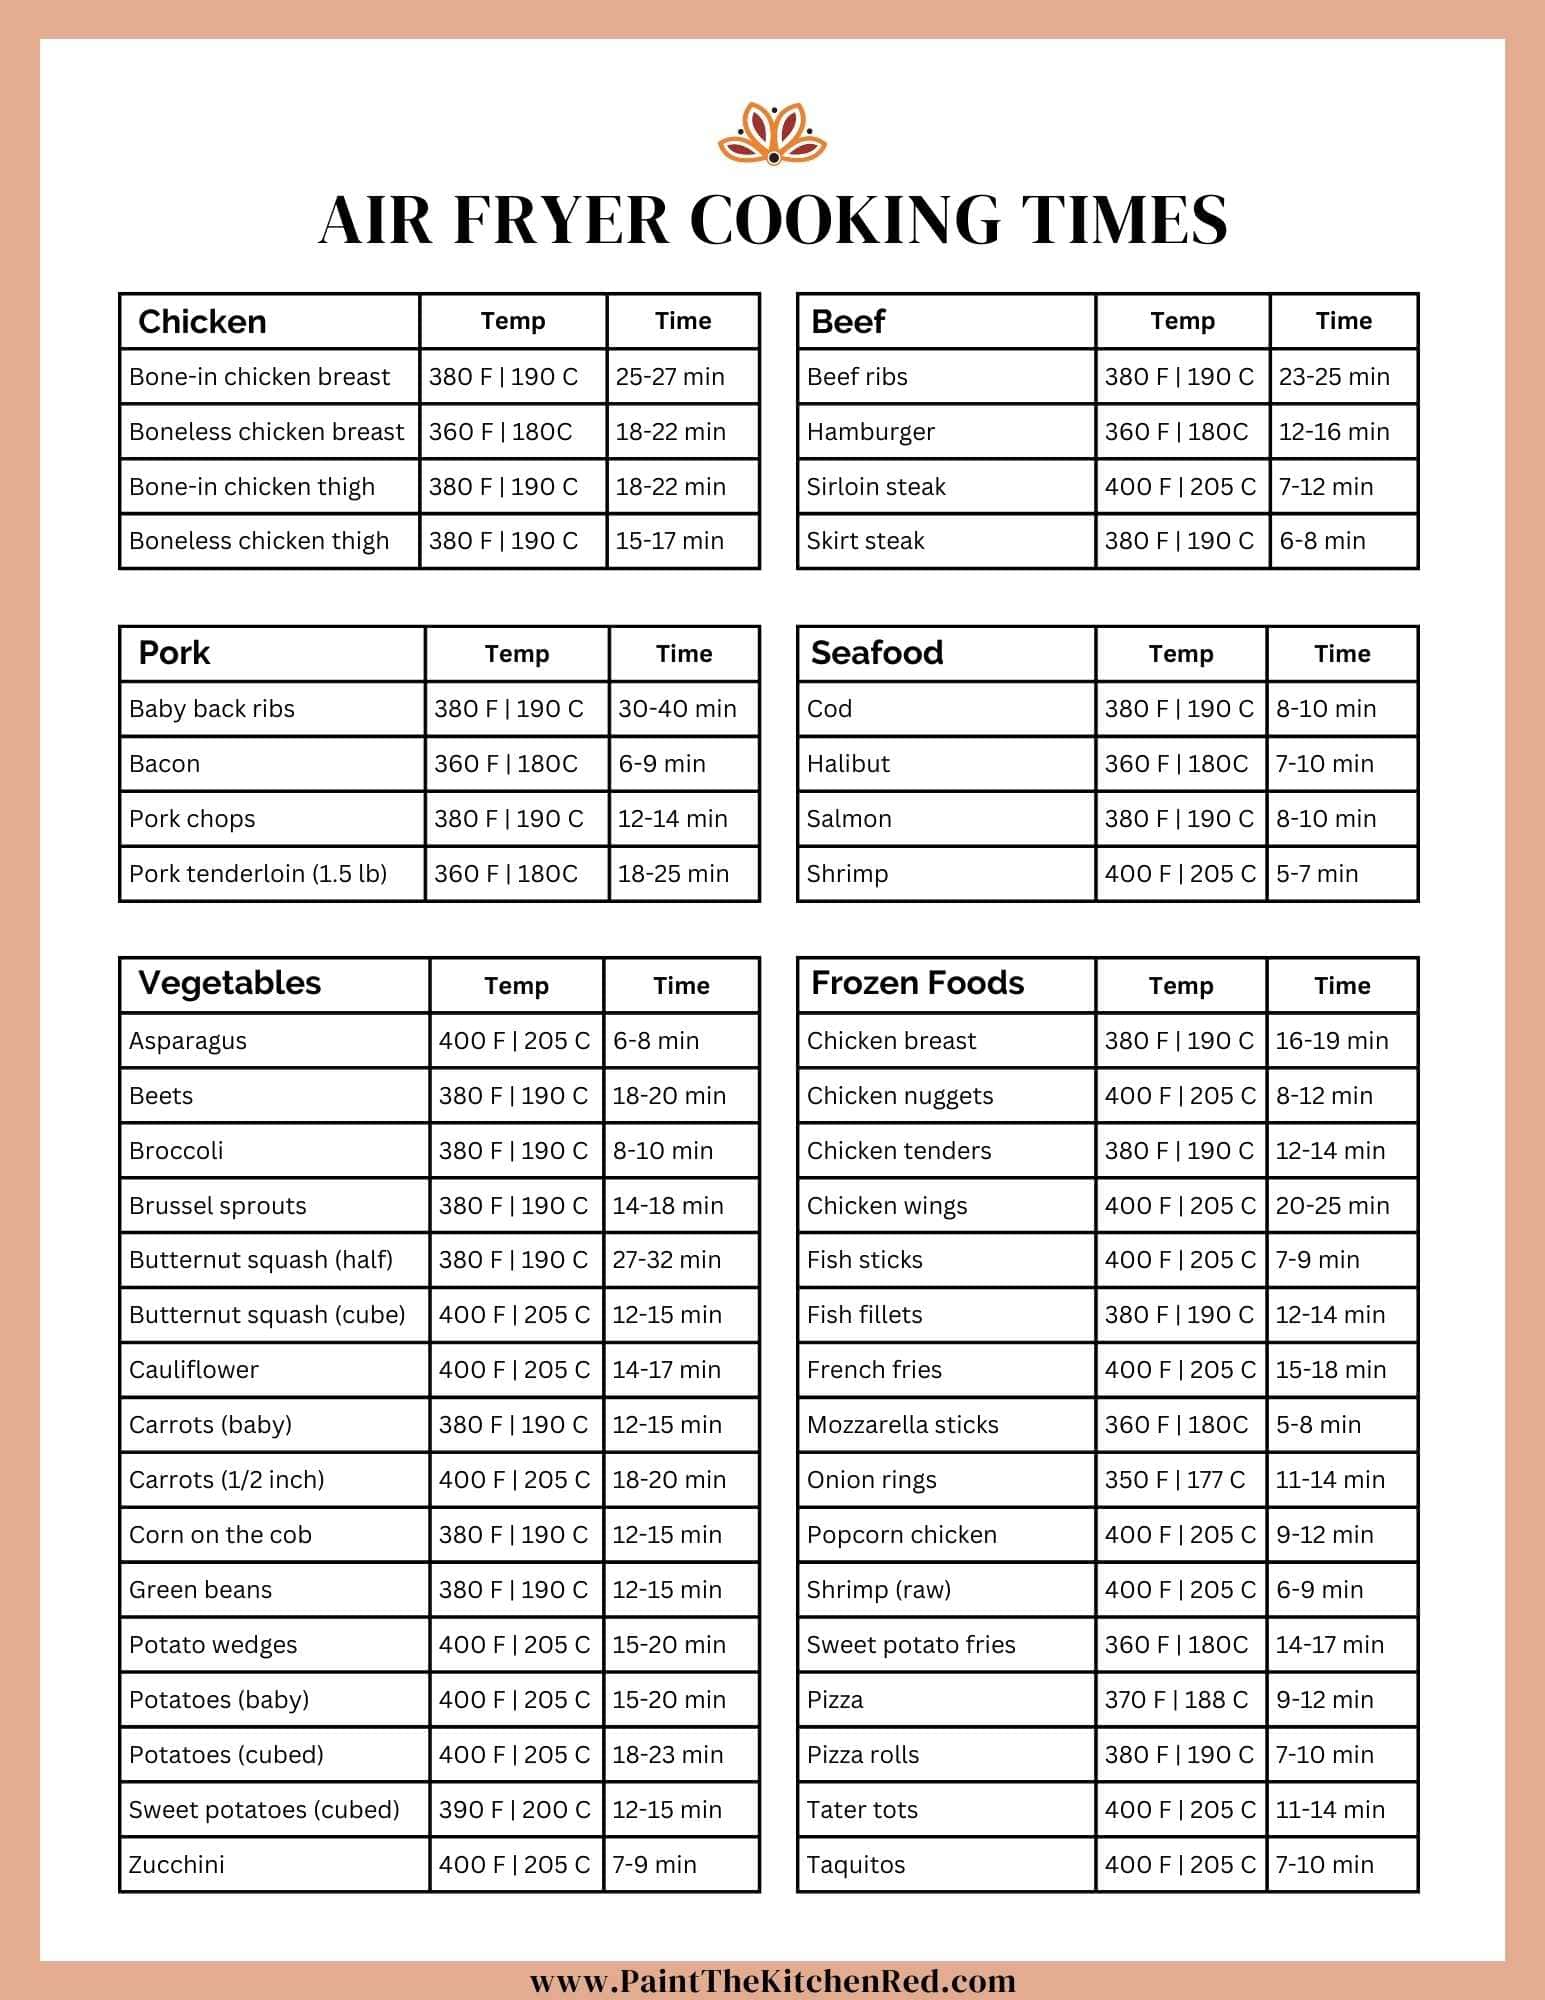 Air fryer cooking times cheat sheet with times for different types of foods